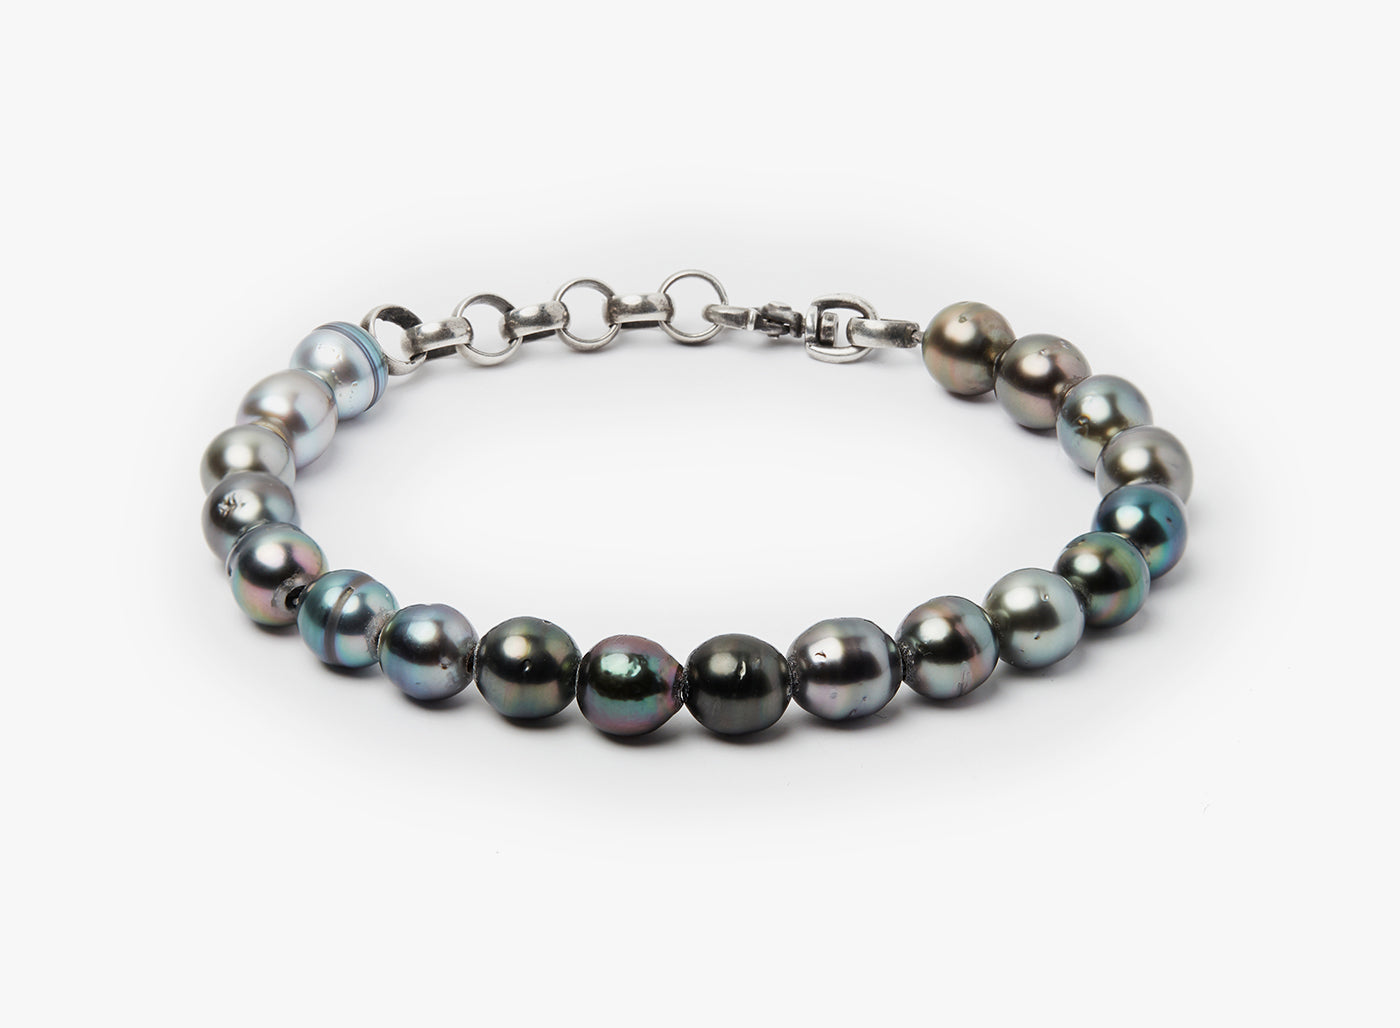 TAHITIAN PEARLS GEM STONE BRACELET 187: this adjustable bracelet features 7.5mm black tahitian pearls bracelet which sit on a sterling silver curb chain